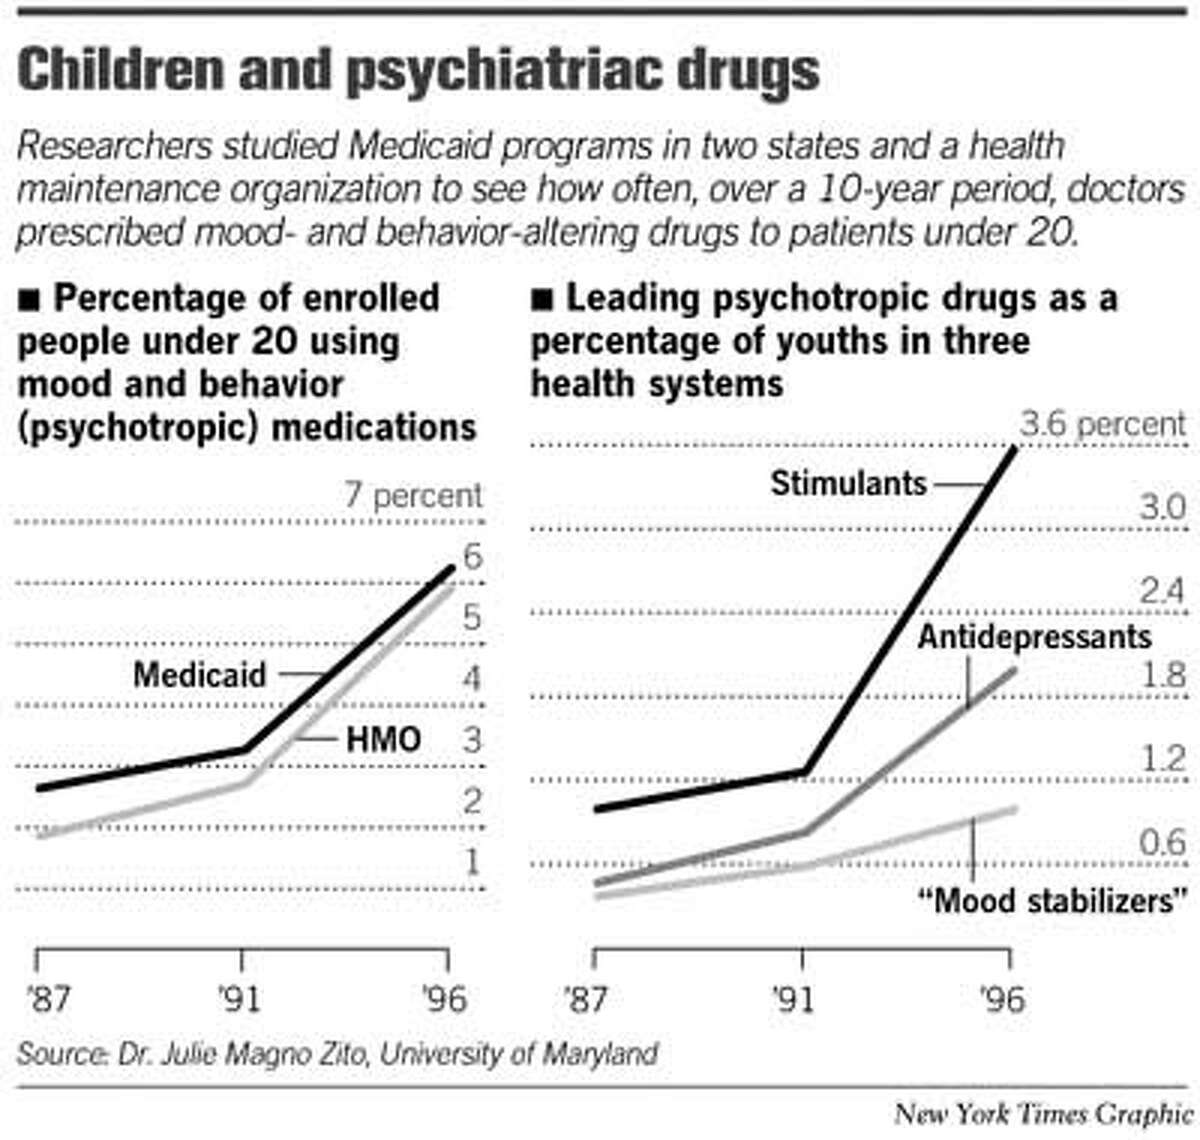 Children and Psychiatric Drugs. New York Times Graphic